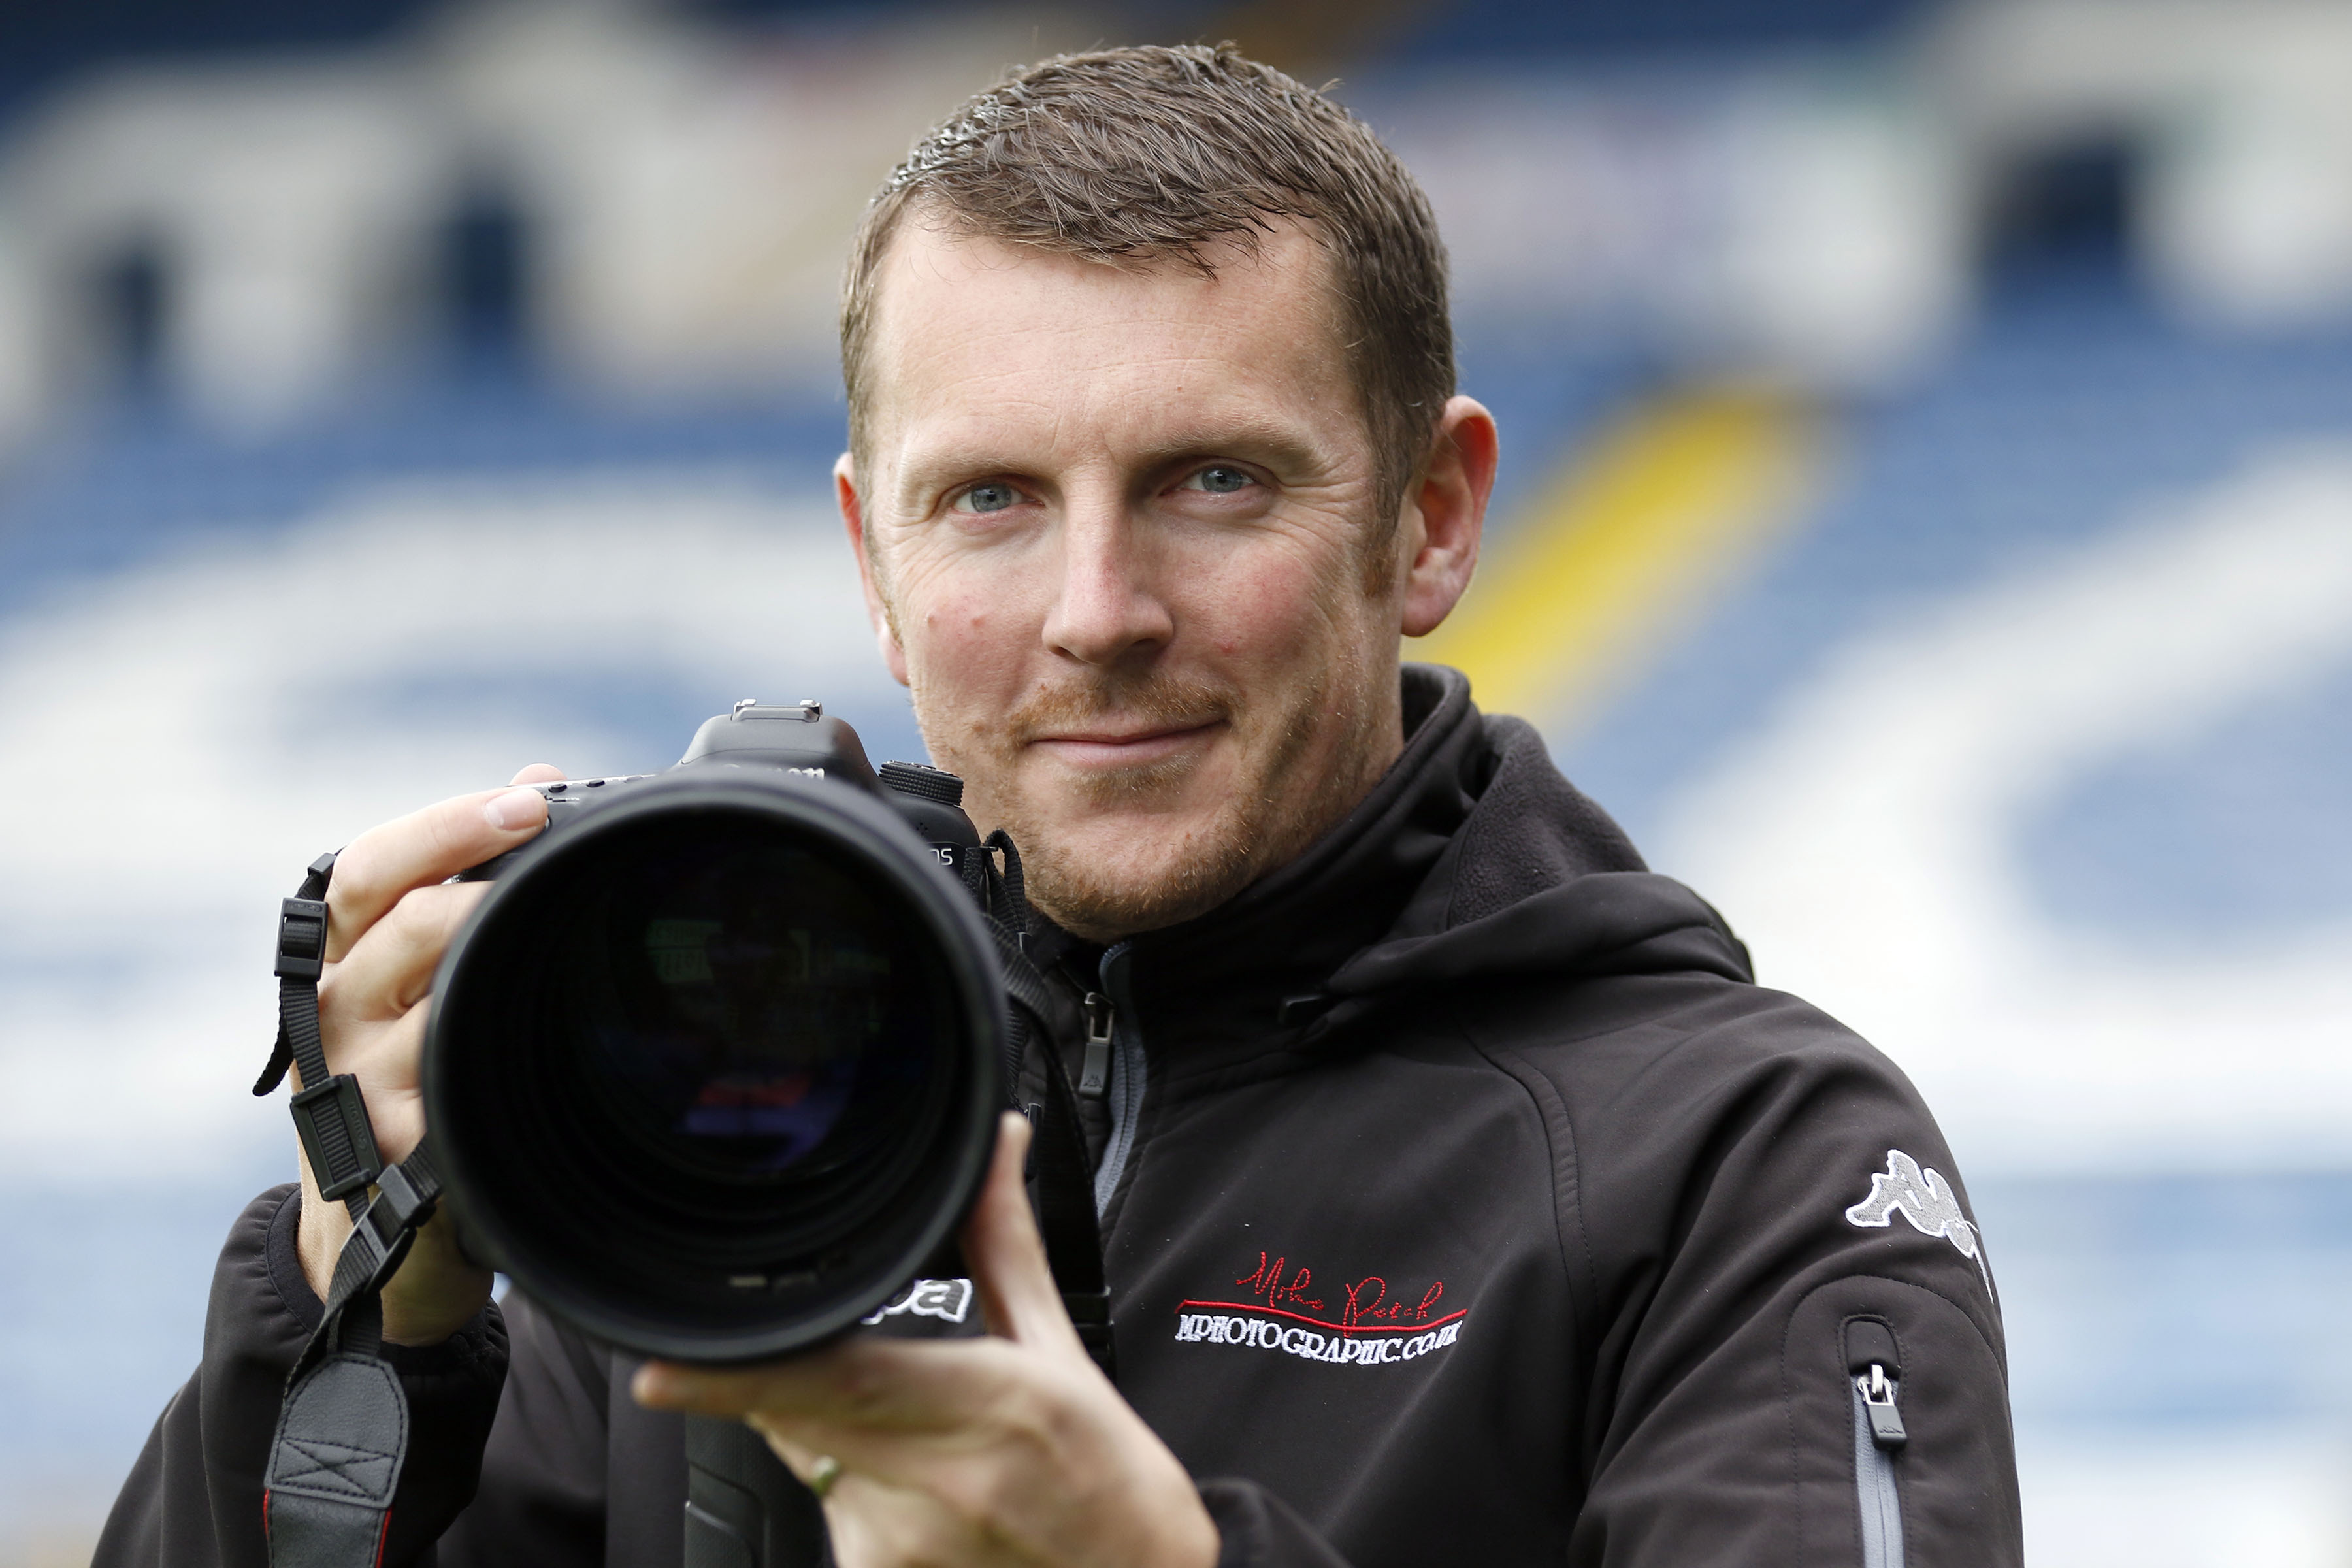 Mike Petch, Photographer - Stockport County Football Club